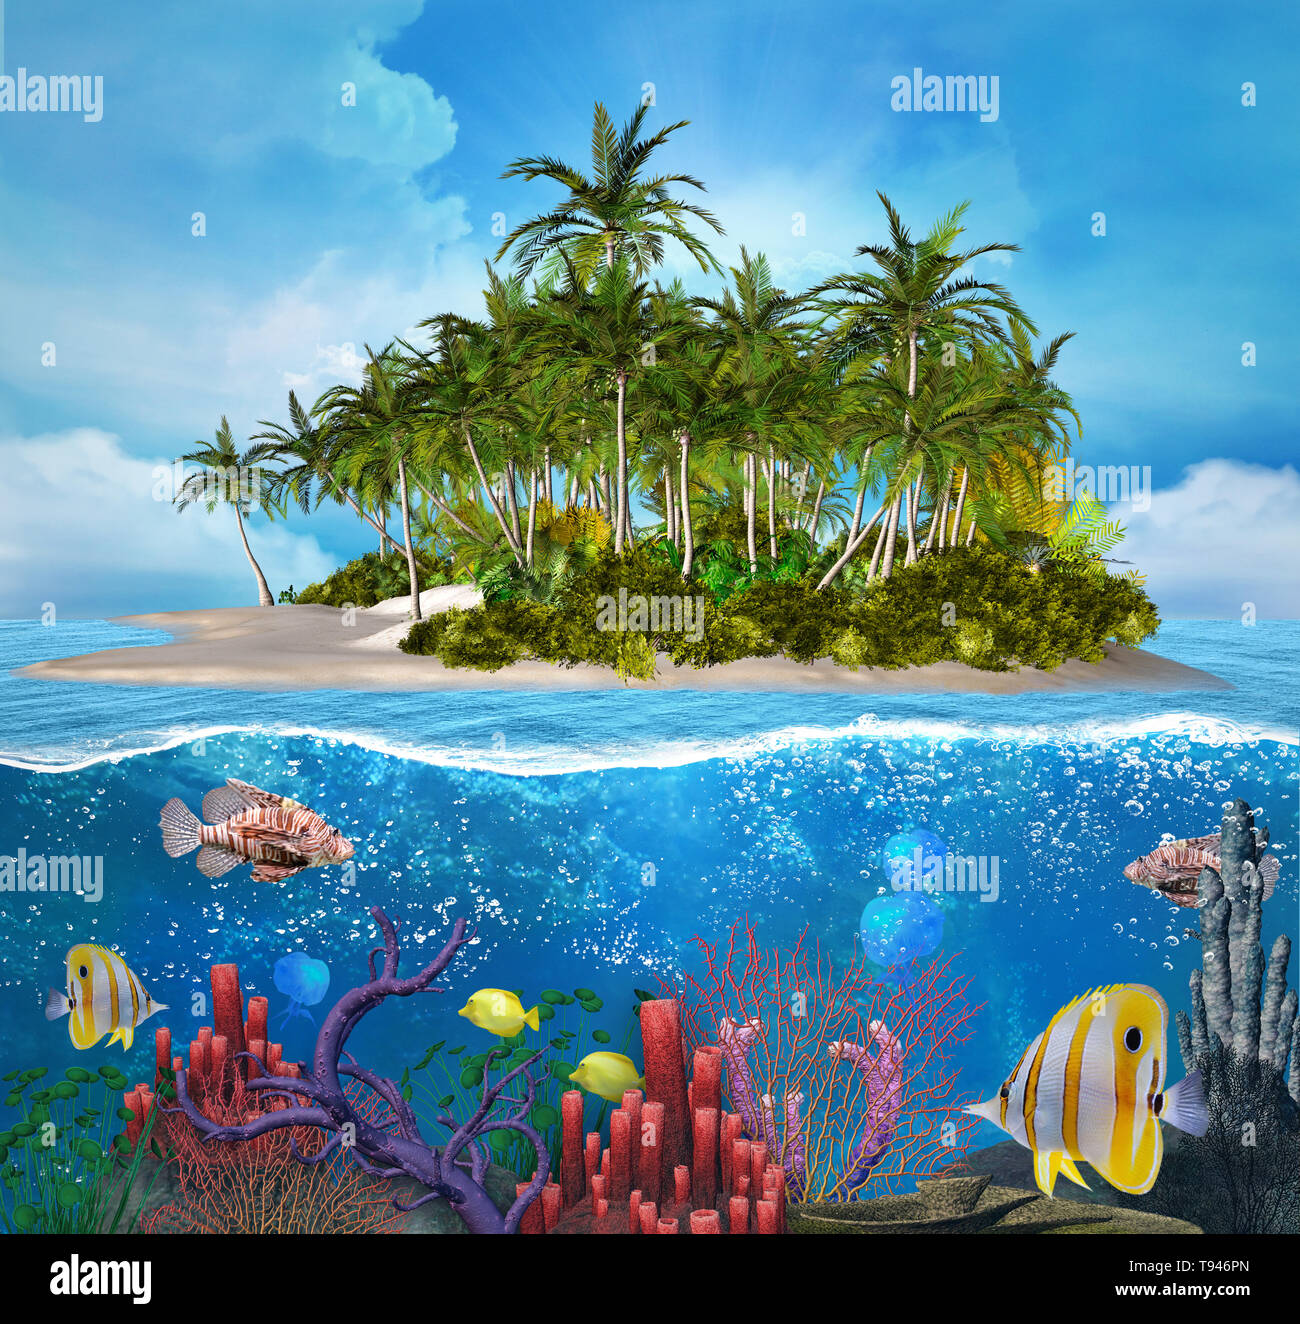 Coral reef with tropical fish in a tropical paradise scenery Stock Photo